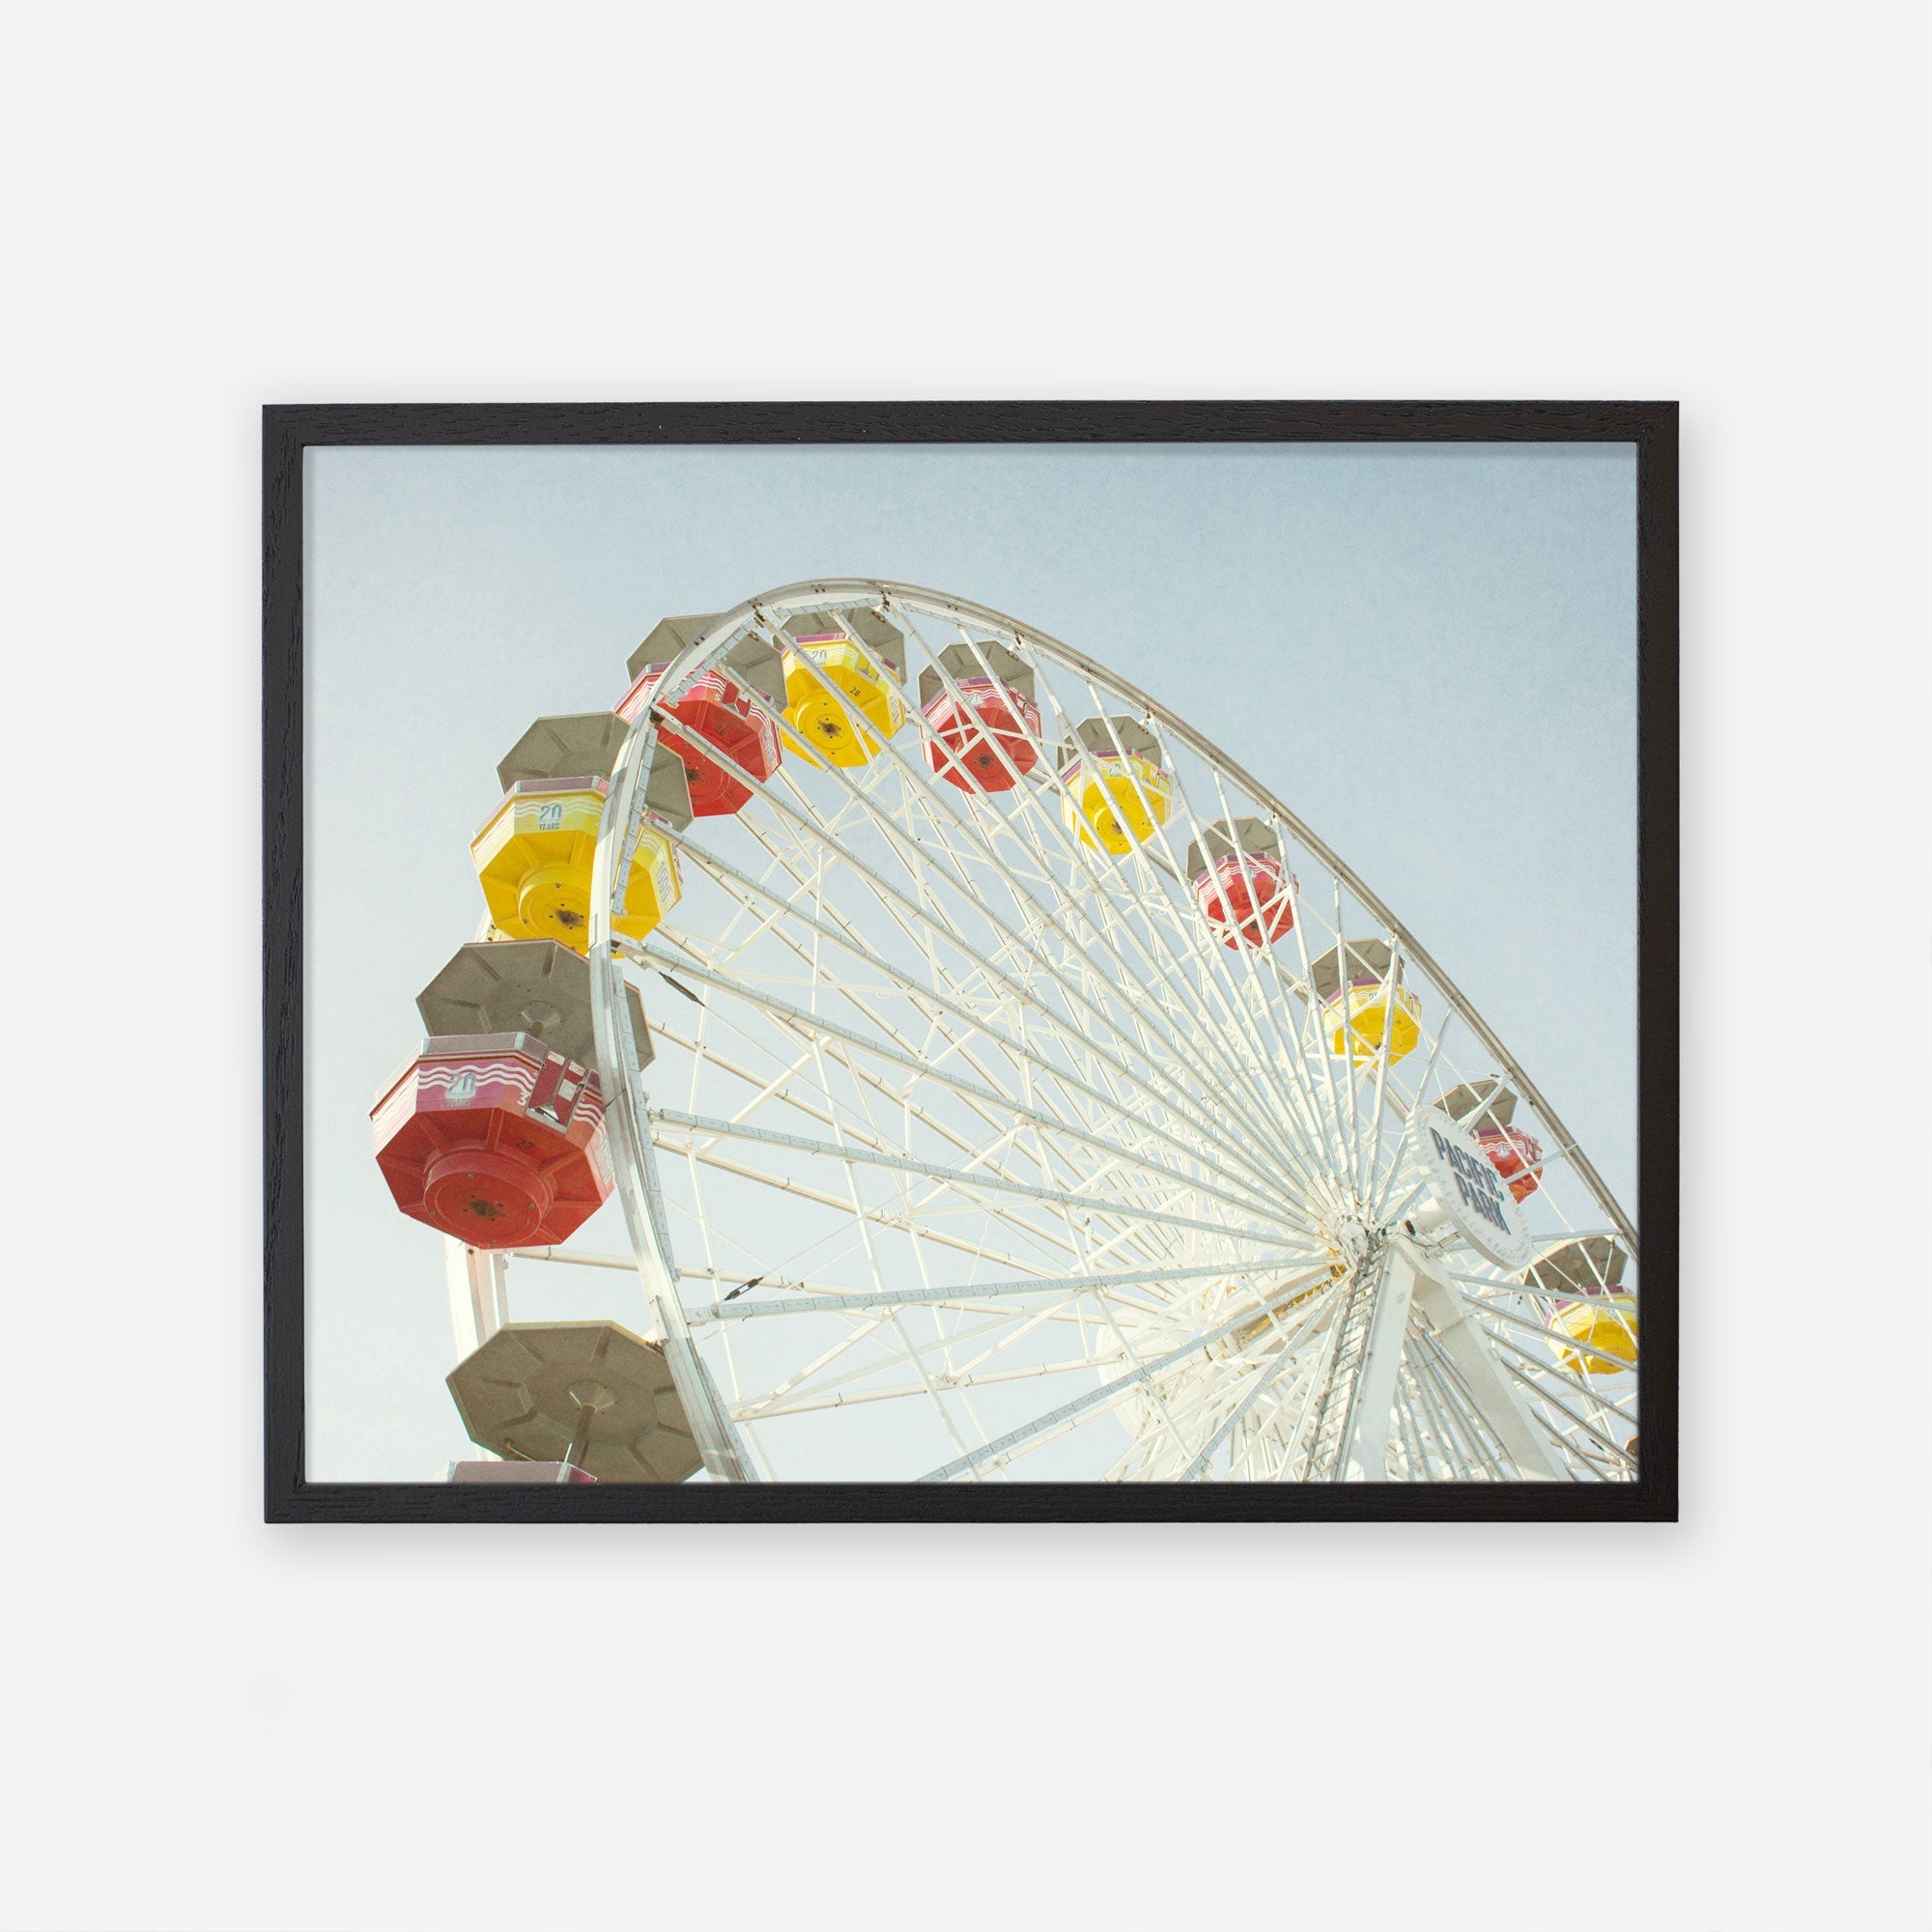 A framed photograph of the Offley Green Santa Monica Ferris Wheel Print, &#39;Ferris Above&#39; with colorful yellow and red cabins against a clear blue sky, angled view looking up from the base.